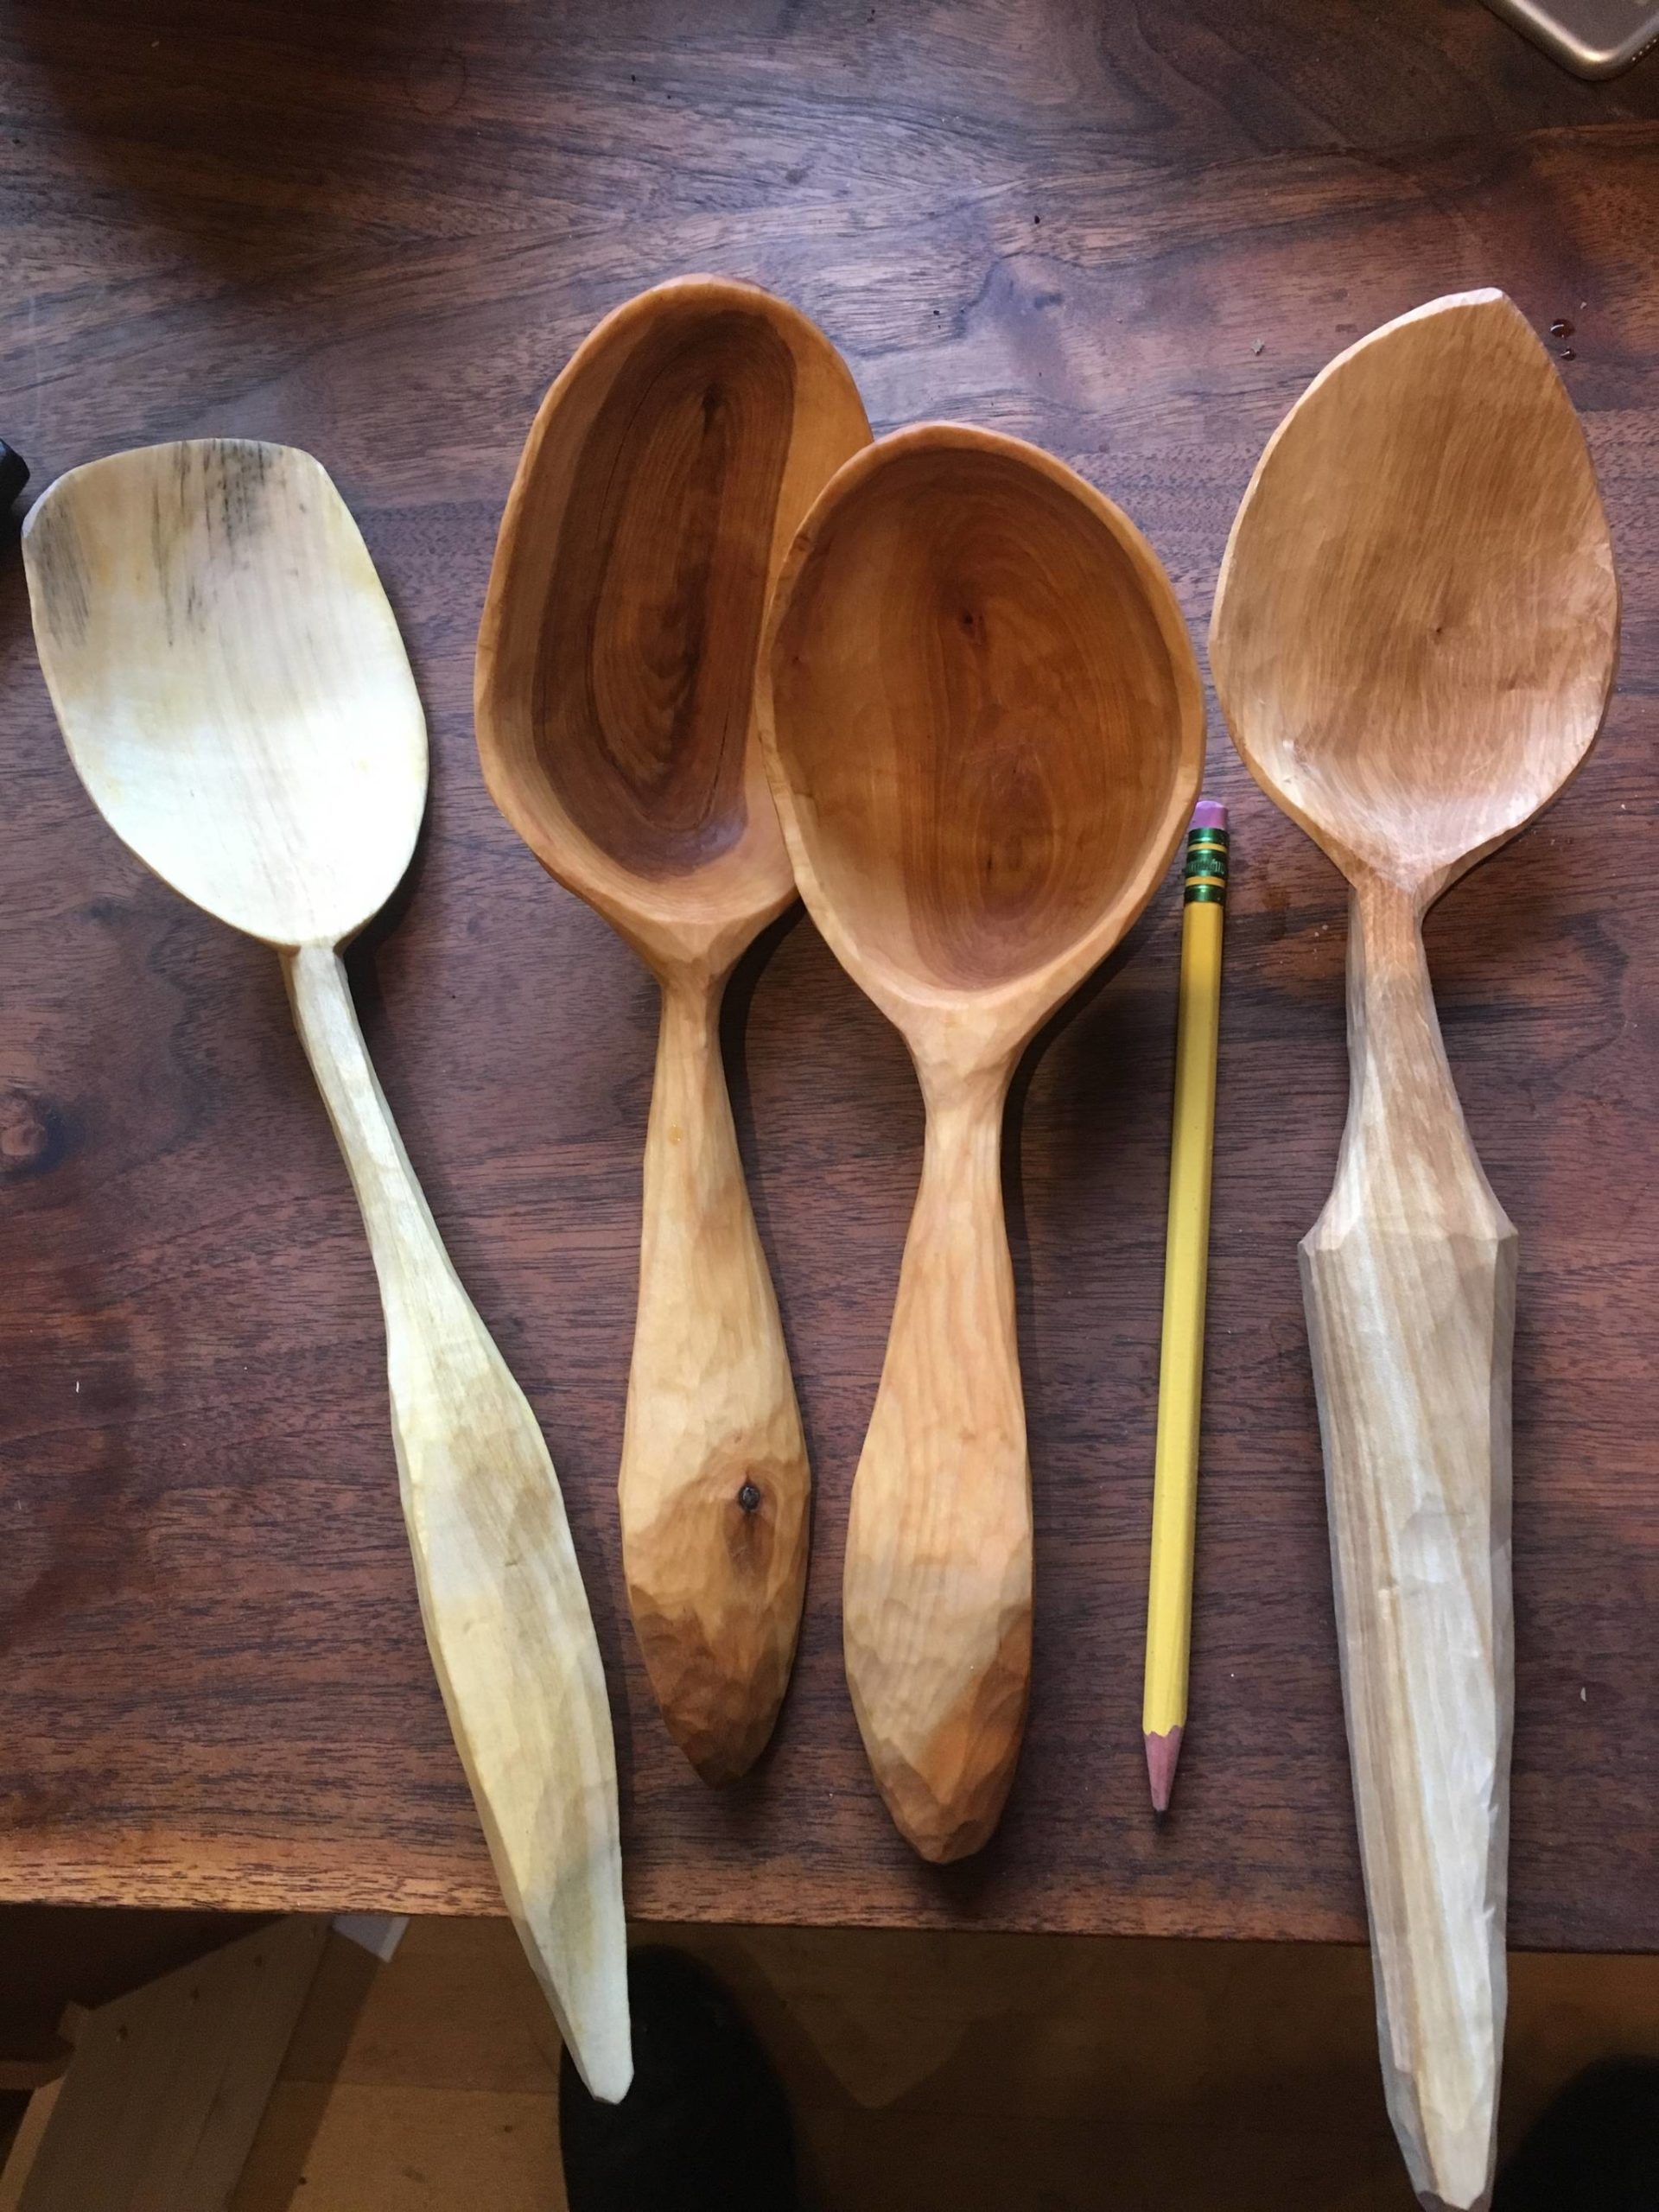 Henry Webb is a woodworker and furniture maker who enjoys using hand tools. He uses mostly green local hardwood to make spoons. His work will be displayed at Coppa for First Friday. (Courtesy Photo / Coppa)